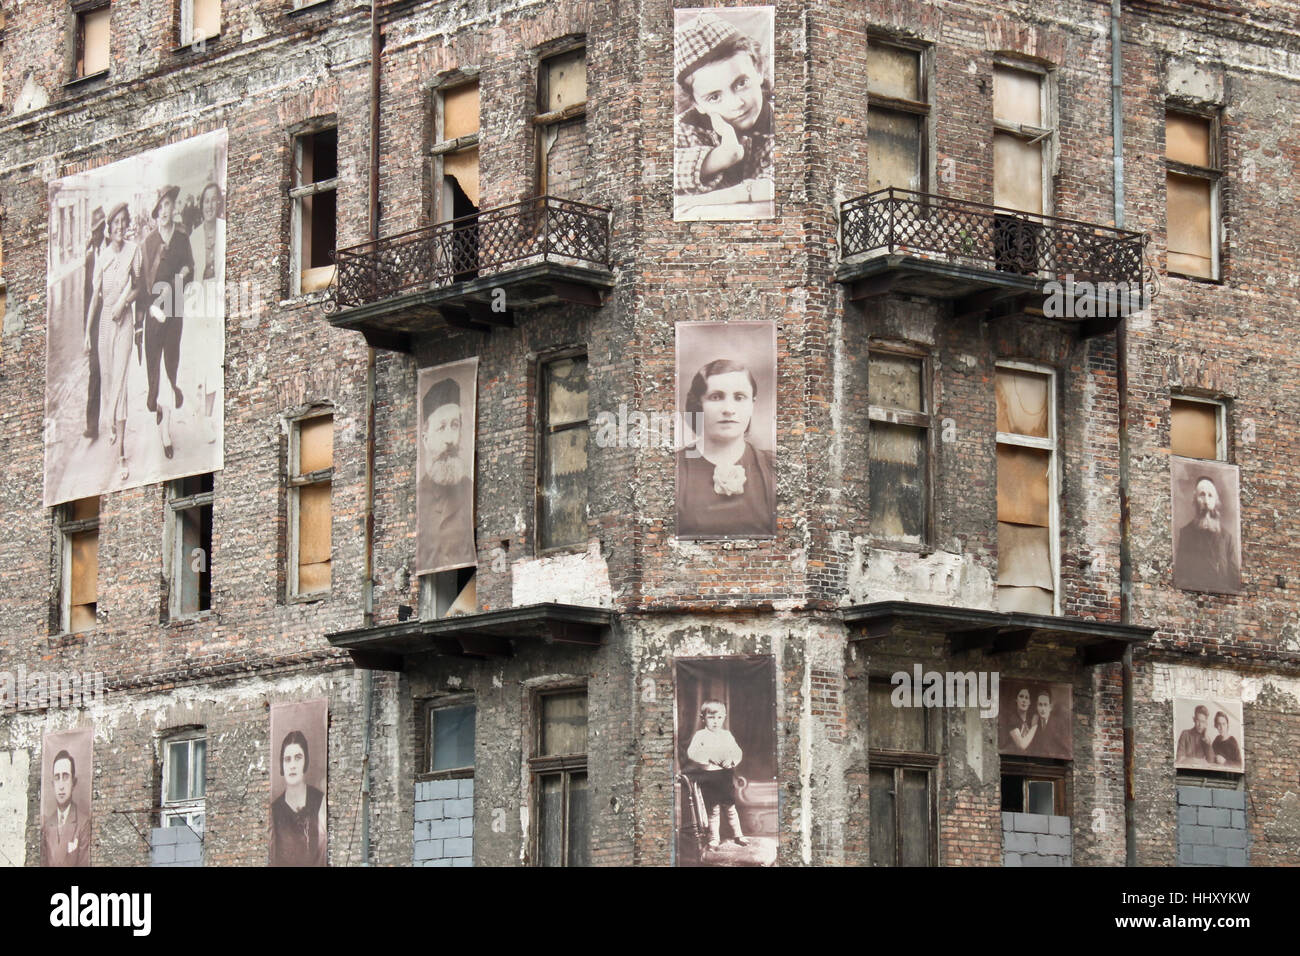 WARSAW, POLAND - SEPTEMBER 1, 2012: Holocaust memorial - a building from Warsaw ghetto with pictures of jews on the facade. Stock Photo